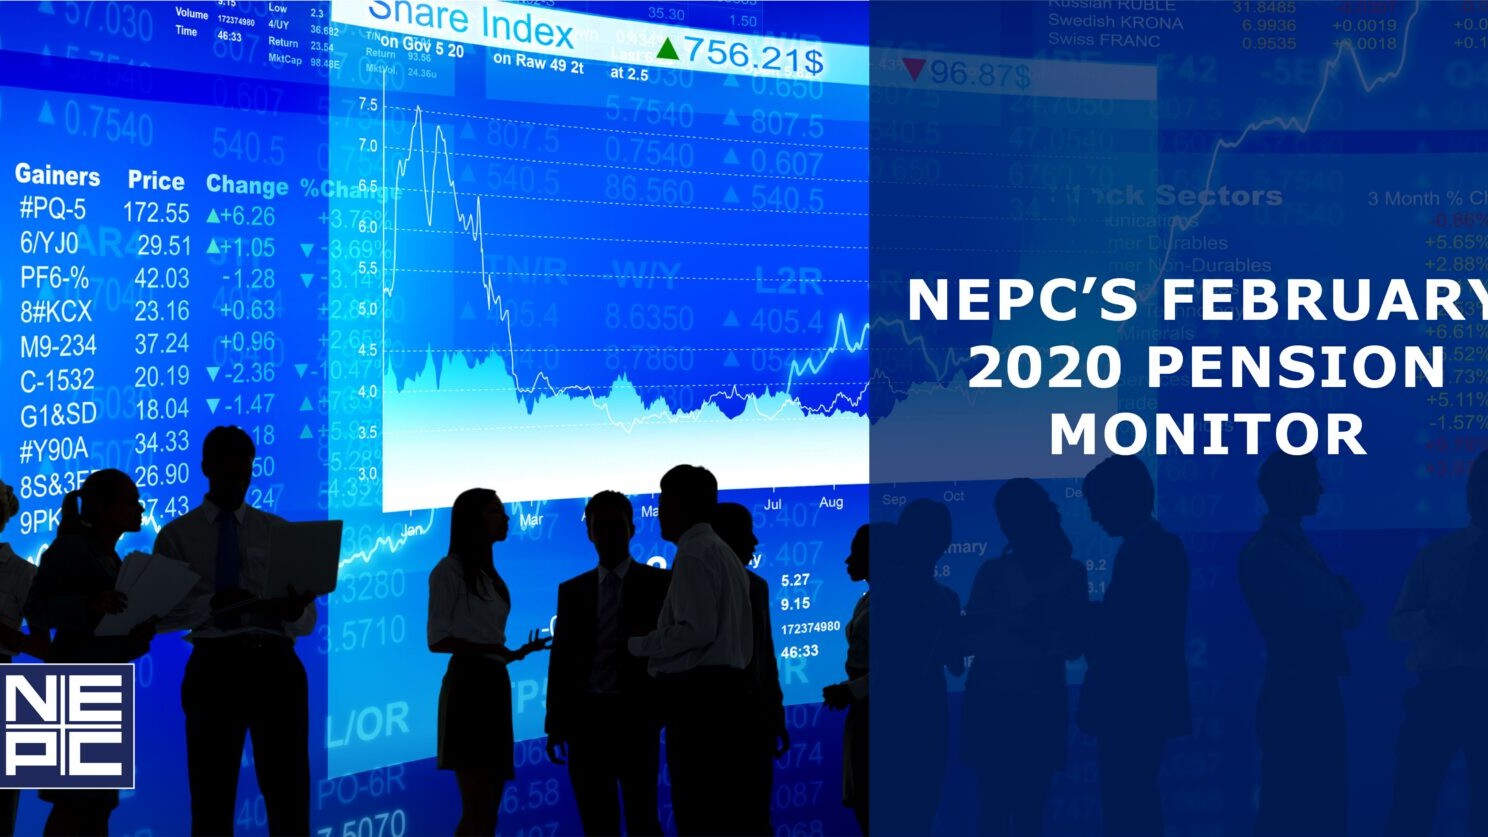 People silhouetted in front of a large screen with stock tables and graphs. Copy reads: NEPC's February 2020 pension monitor.